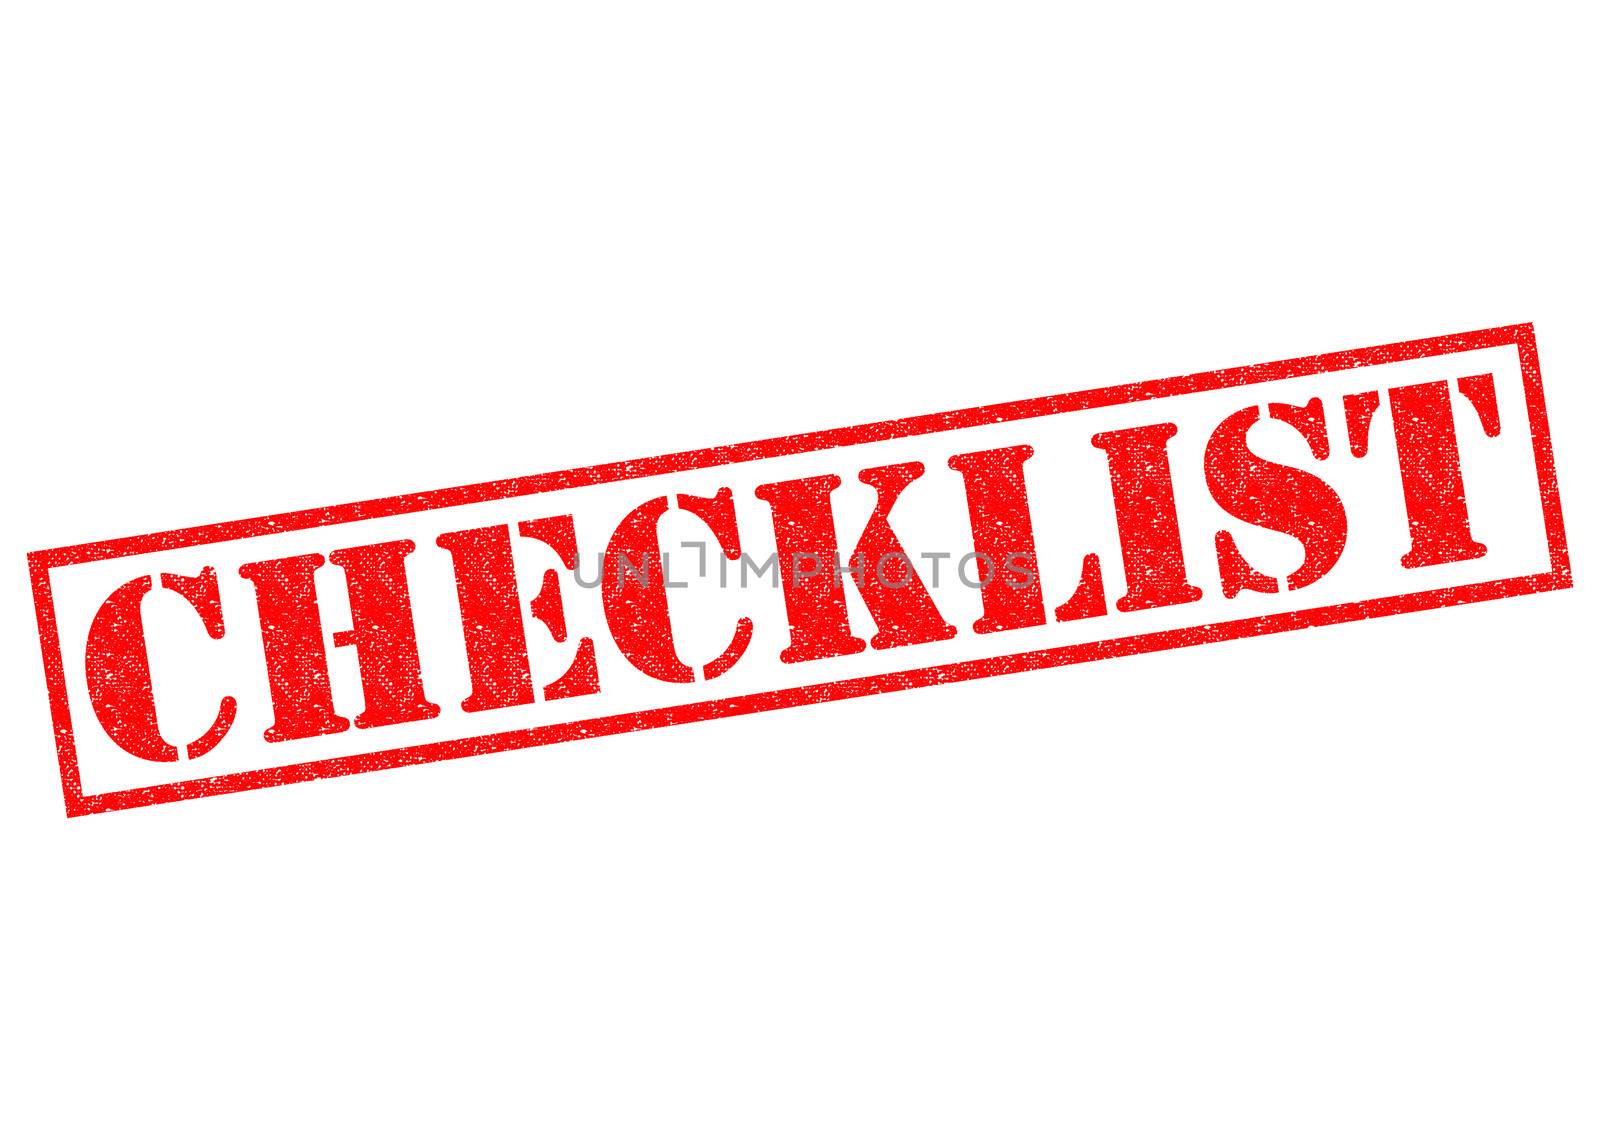 CHECKLIST red Rubber Stamp over a white background